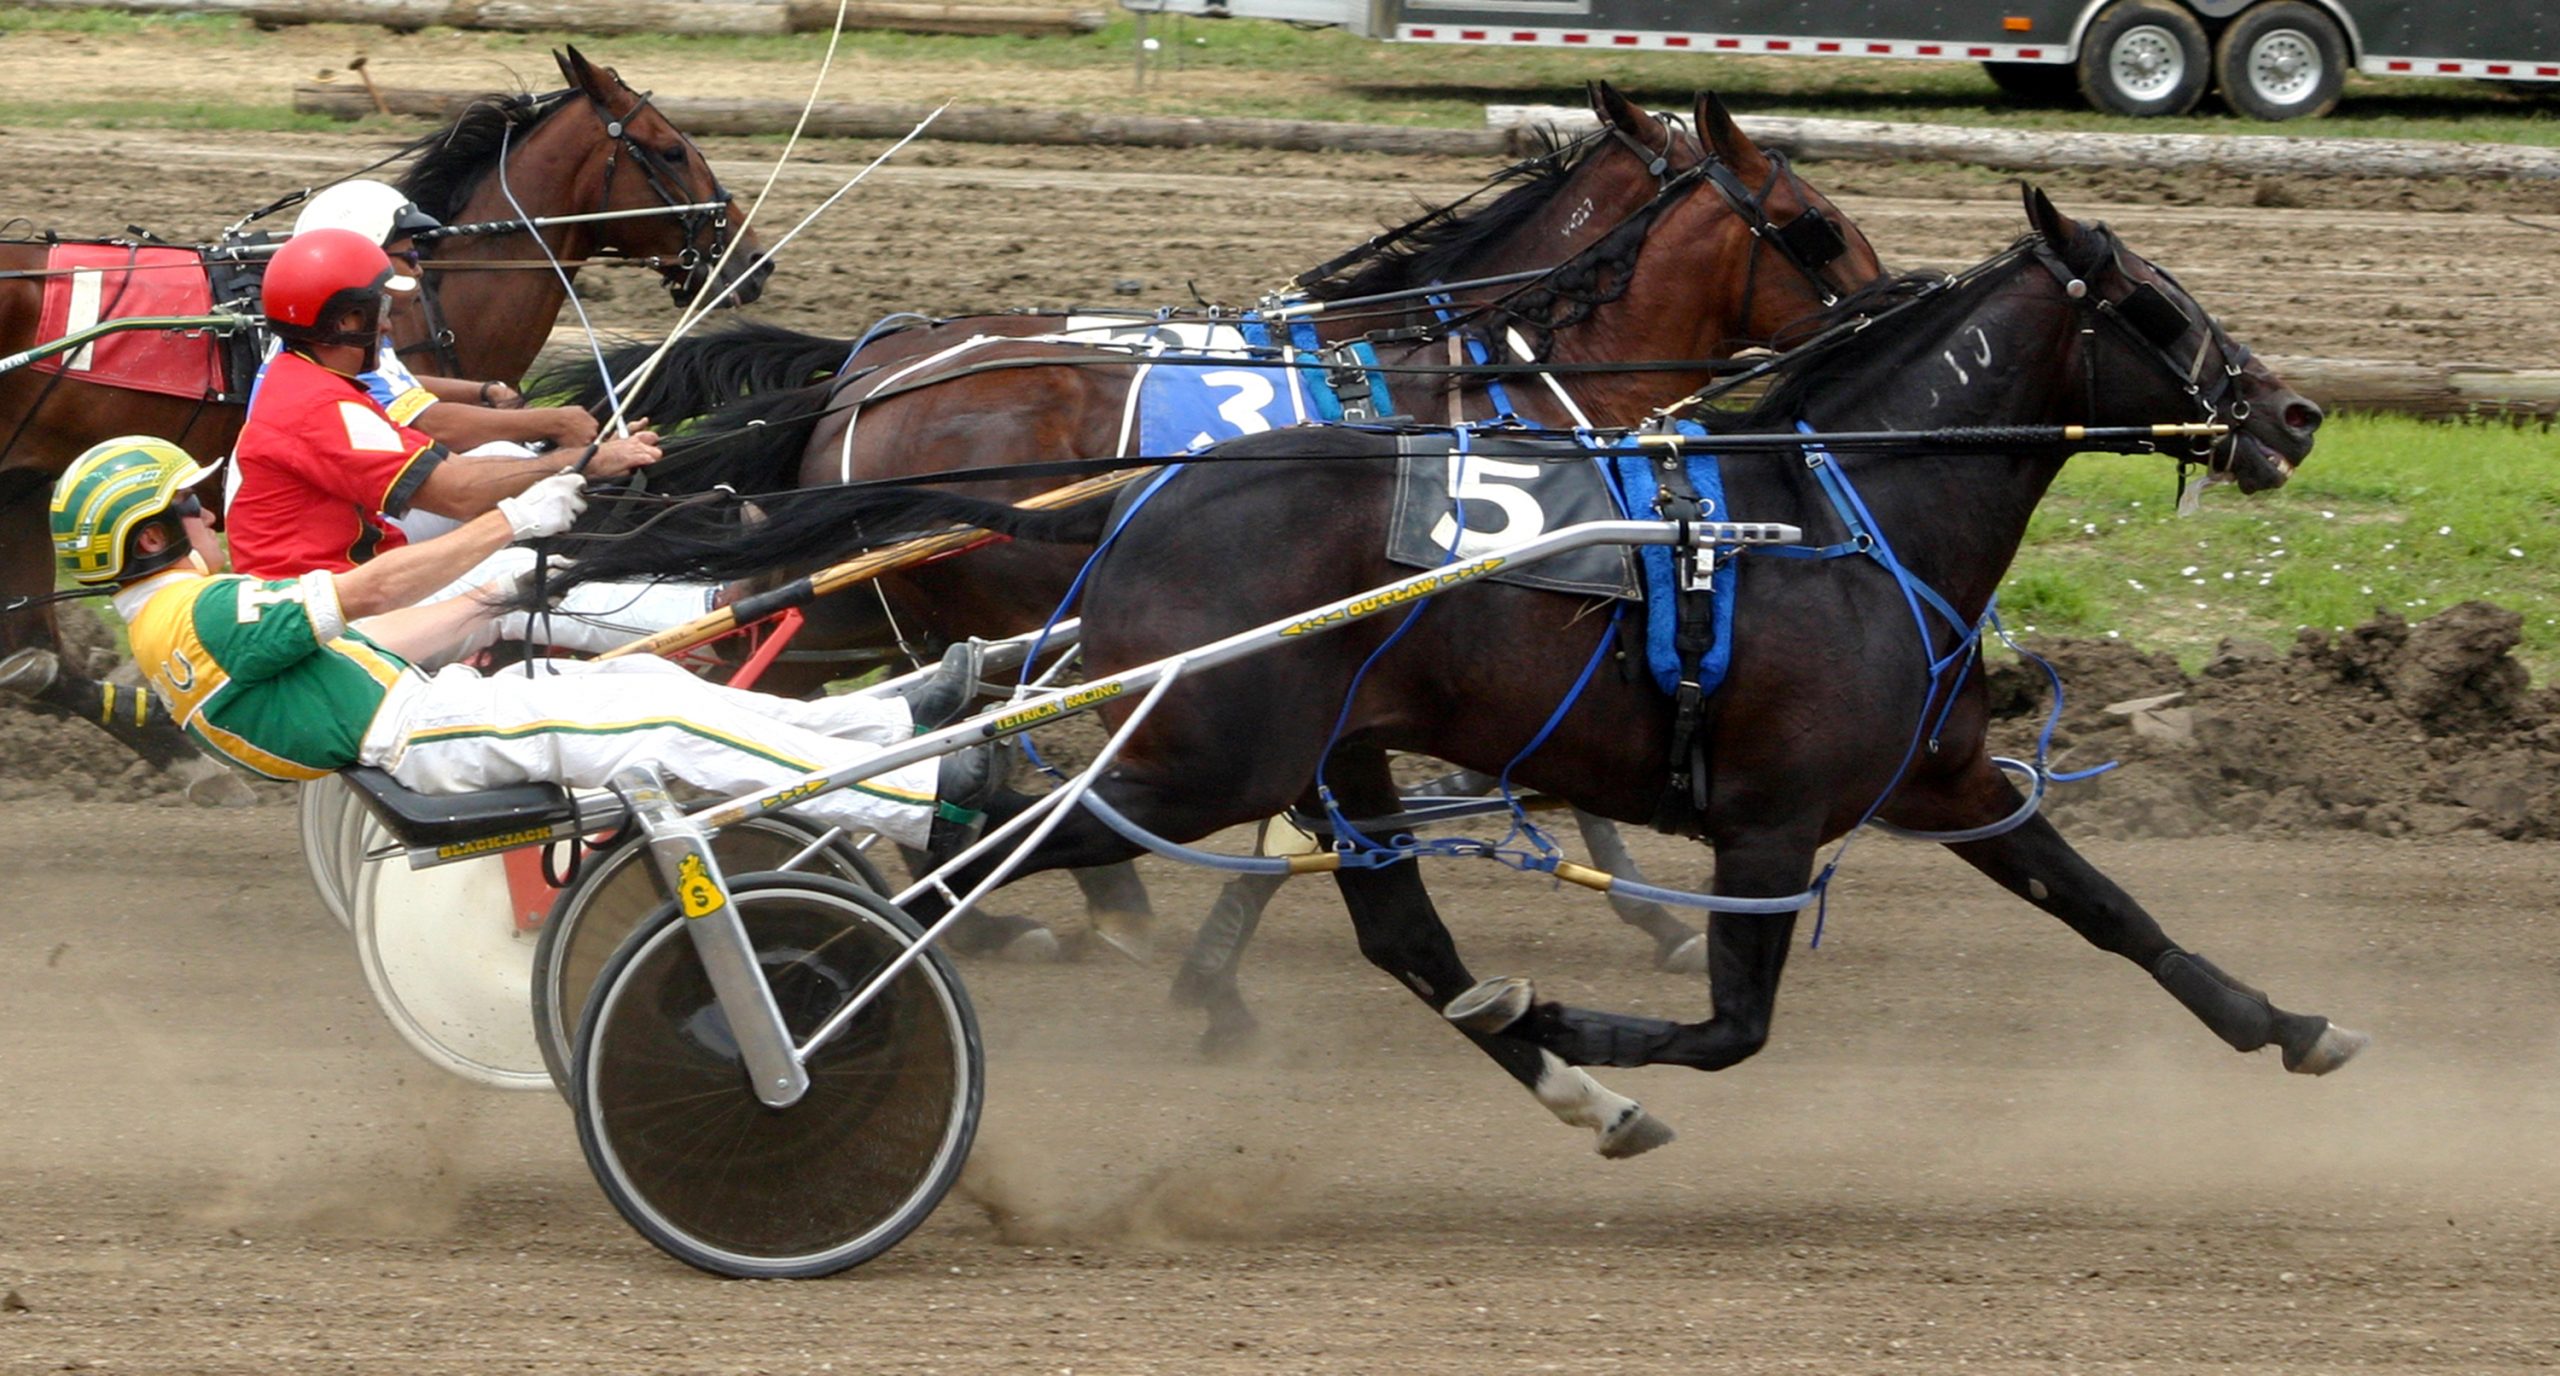 Harness Racing at the Illinois state fairs